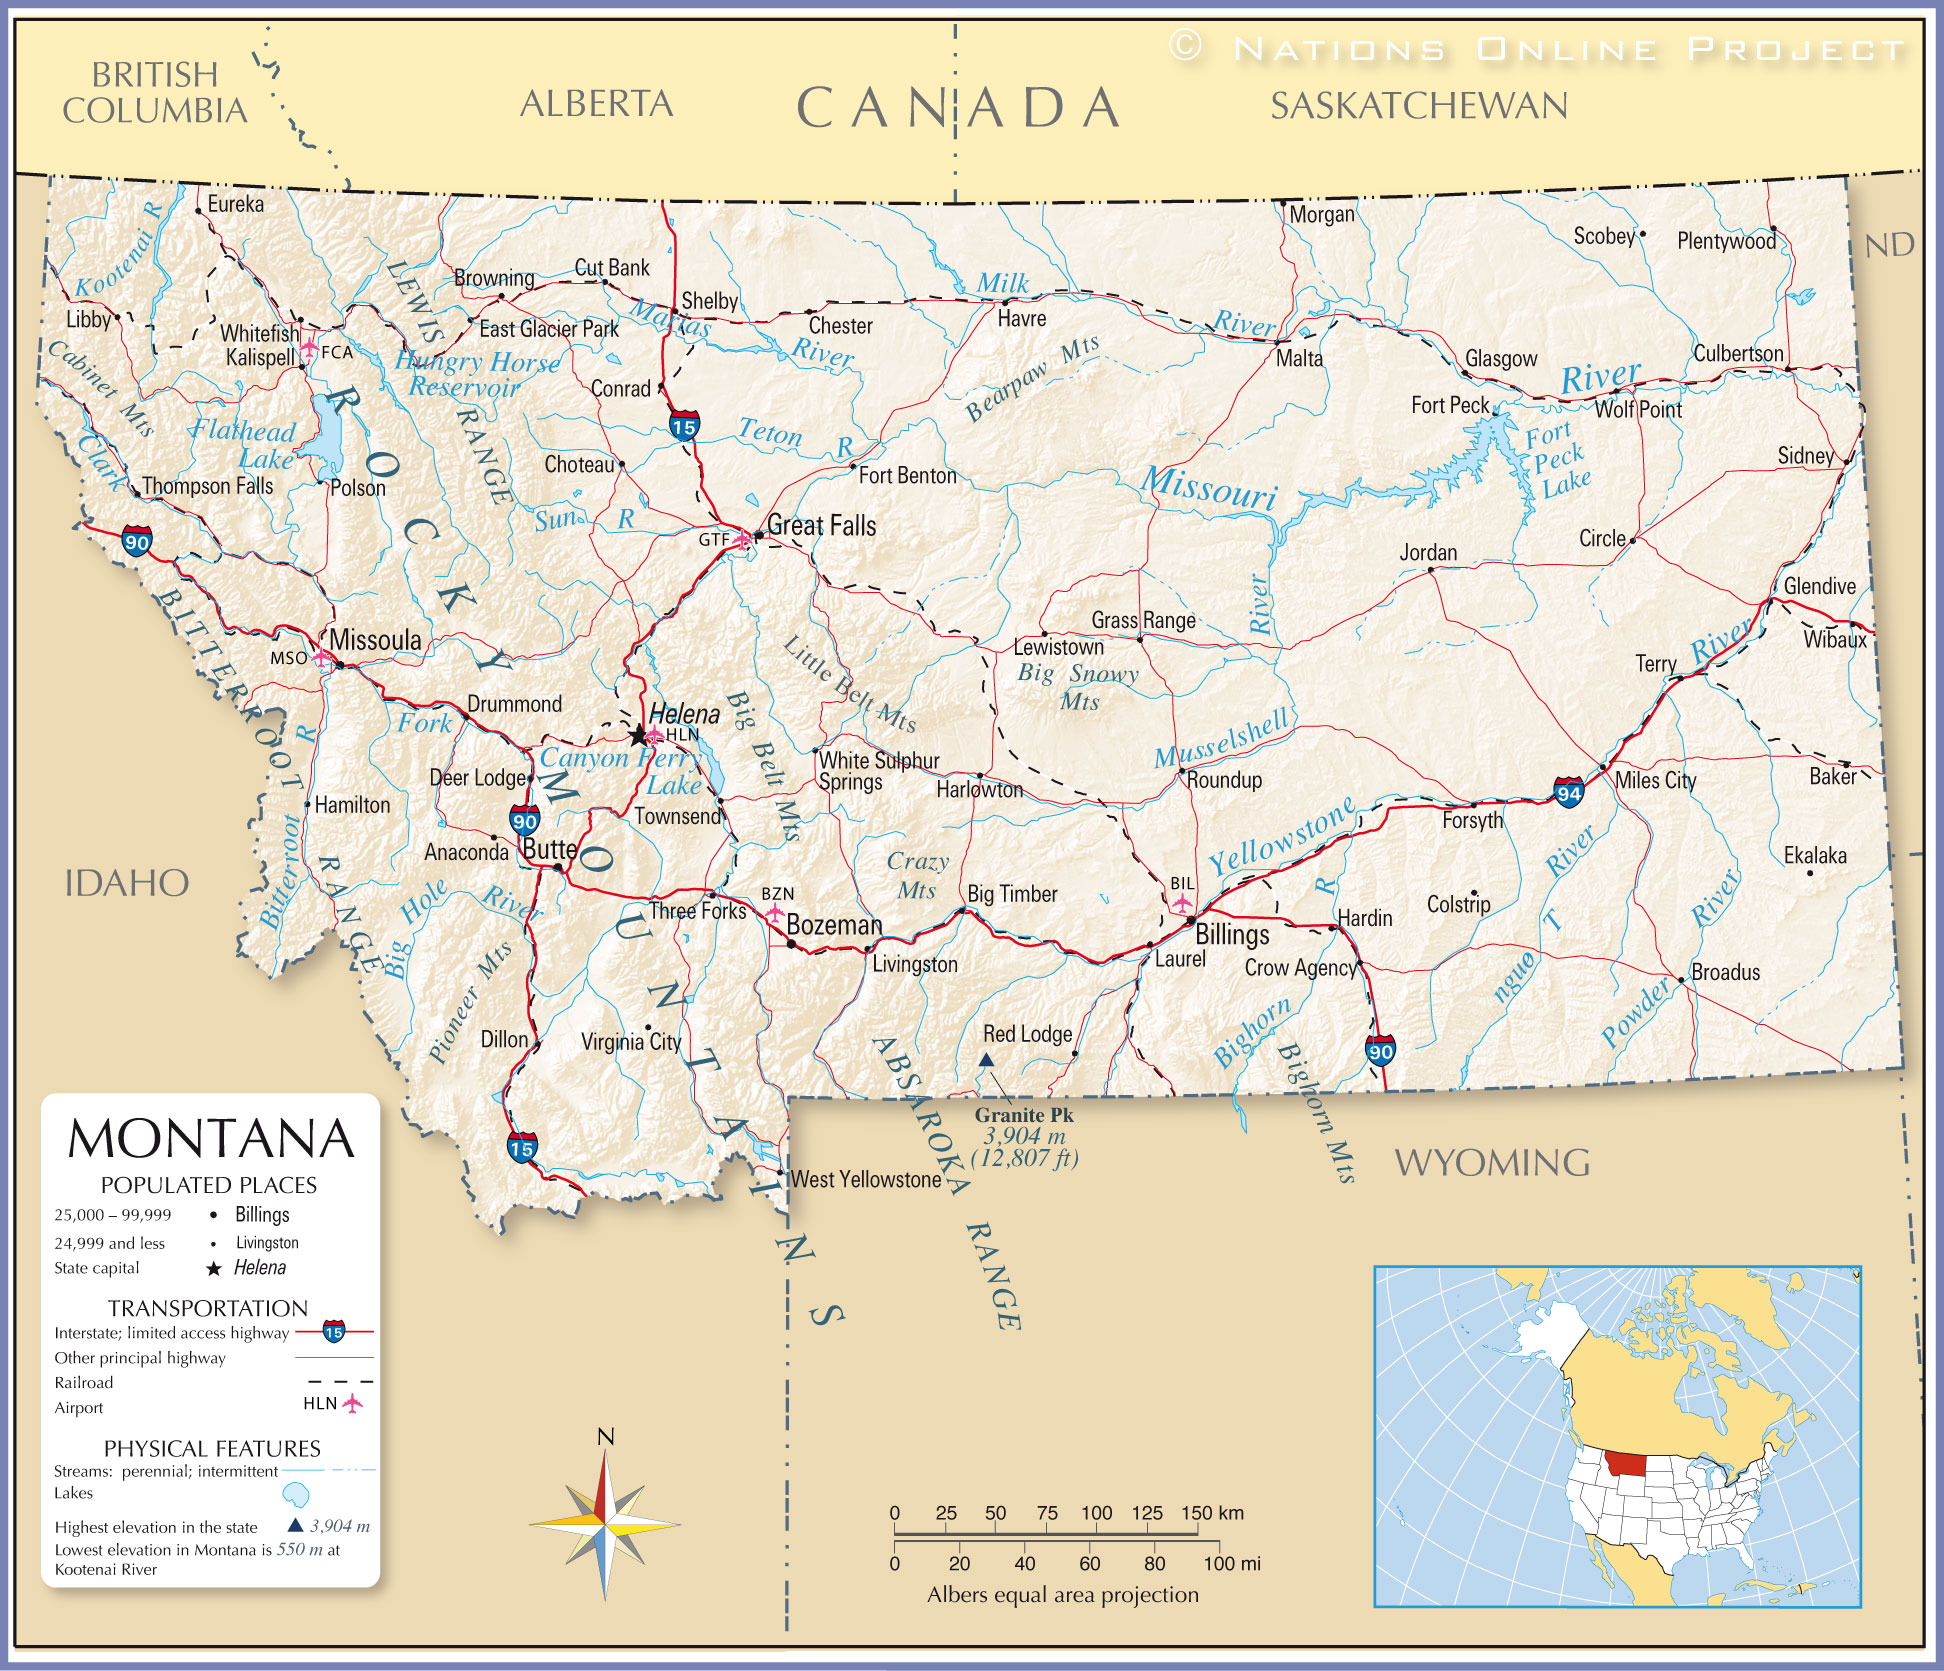 Reference Maps of Montana, USA - Nations Online Project